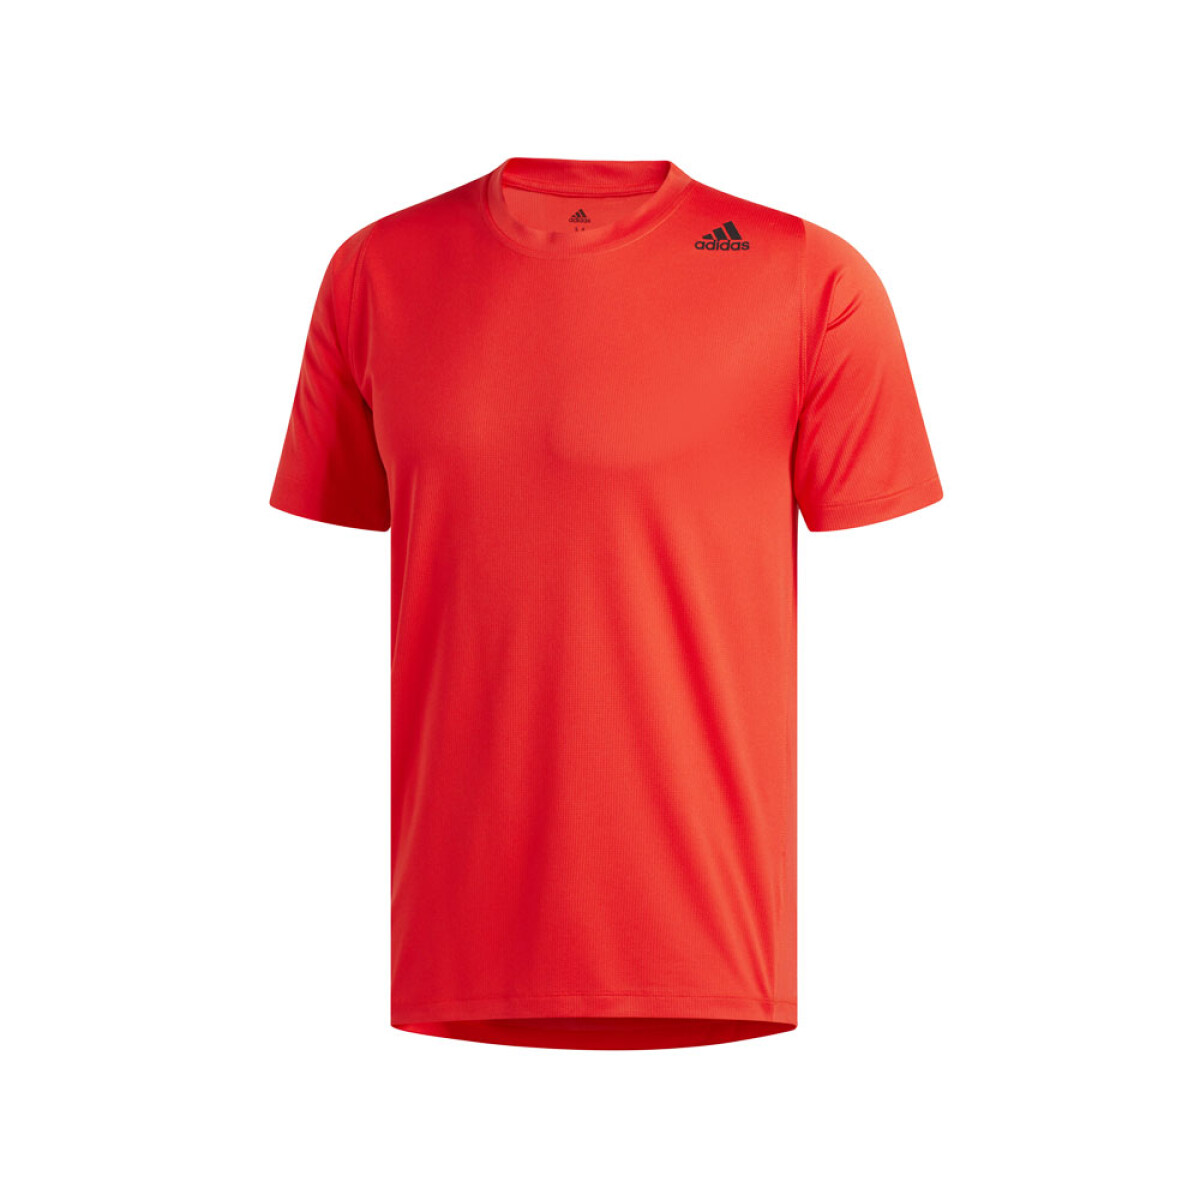 Remera adidas FreeLift Sport Fitted - 000 